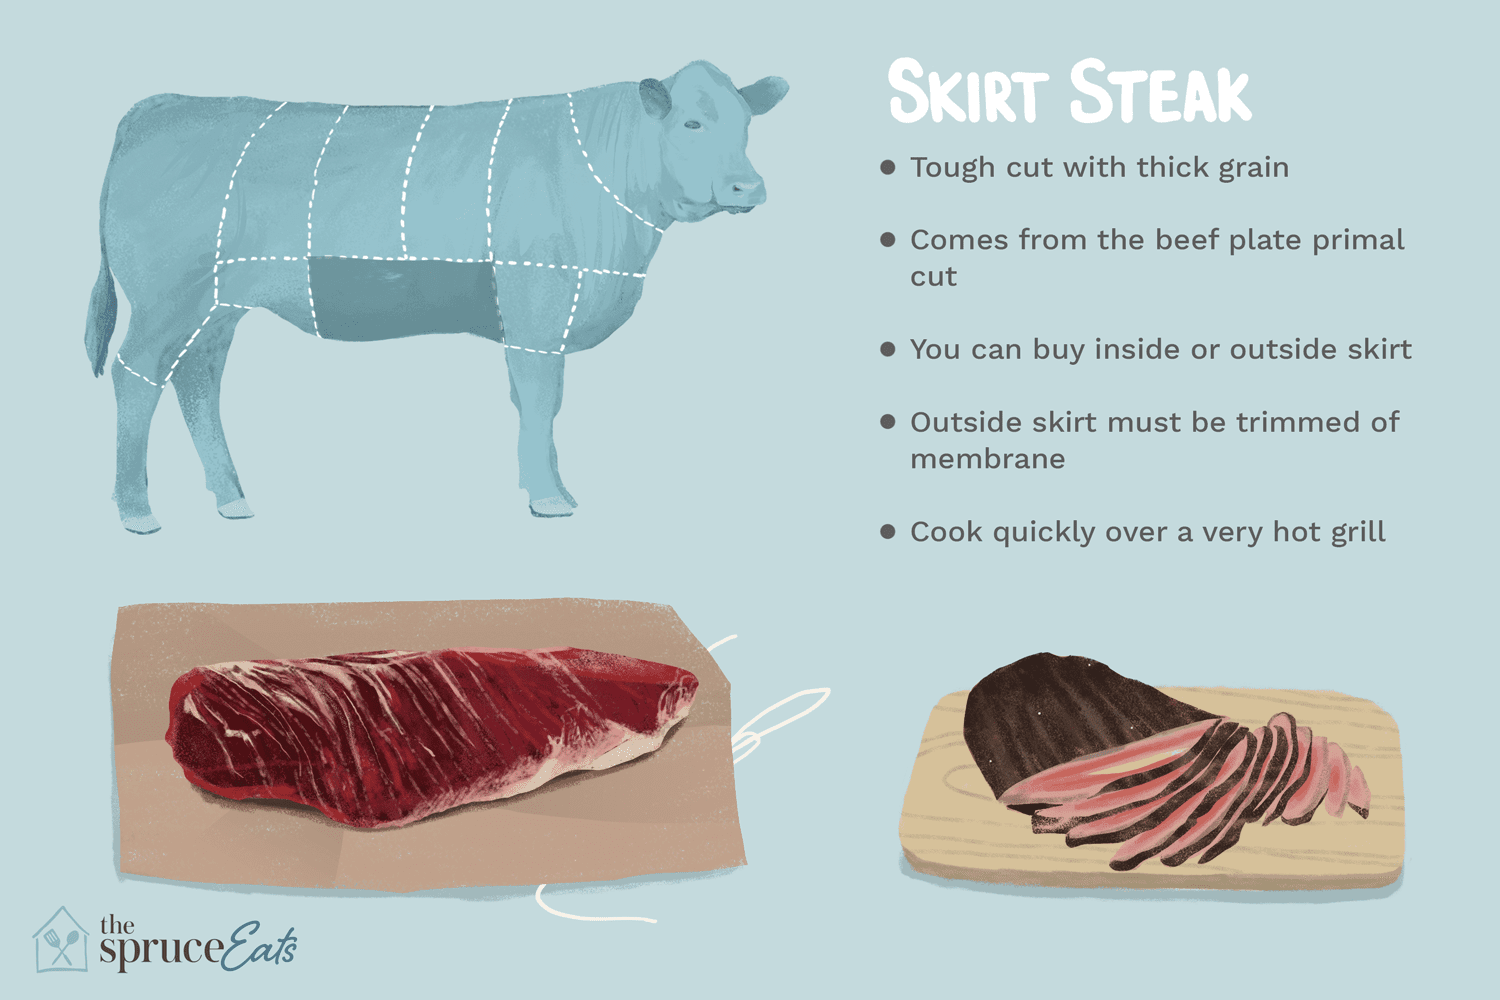 Flap Steak Is What Part Of The Cow